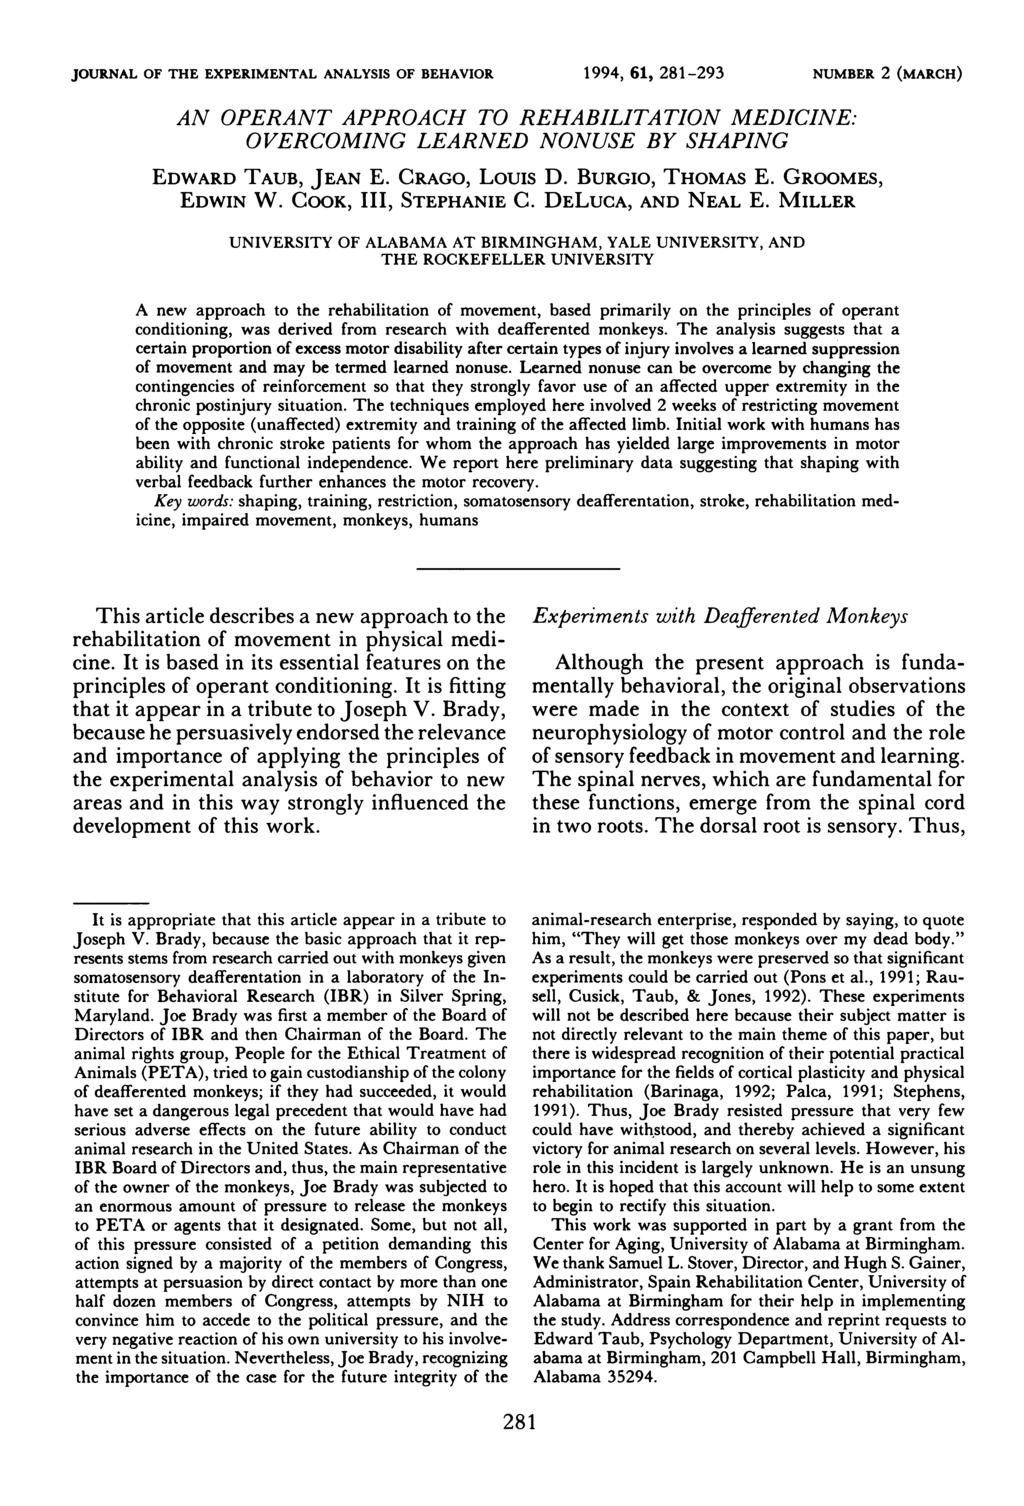 JOURNAL OF THE EXPERIMENTAL ANALYSIS OF BEHAVIOR 1994, 61, 281-293 NUMBER 2 (MARCH) AN OPERANT APPROACH TO REHABILITATION MEDICINE: OVERCOMING LEARNED NONUSE BY SHAPING EDWARD TAUB, JEAN E.